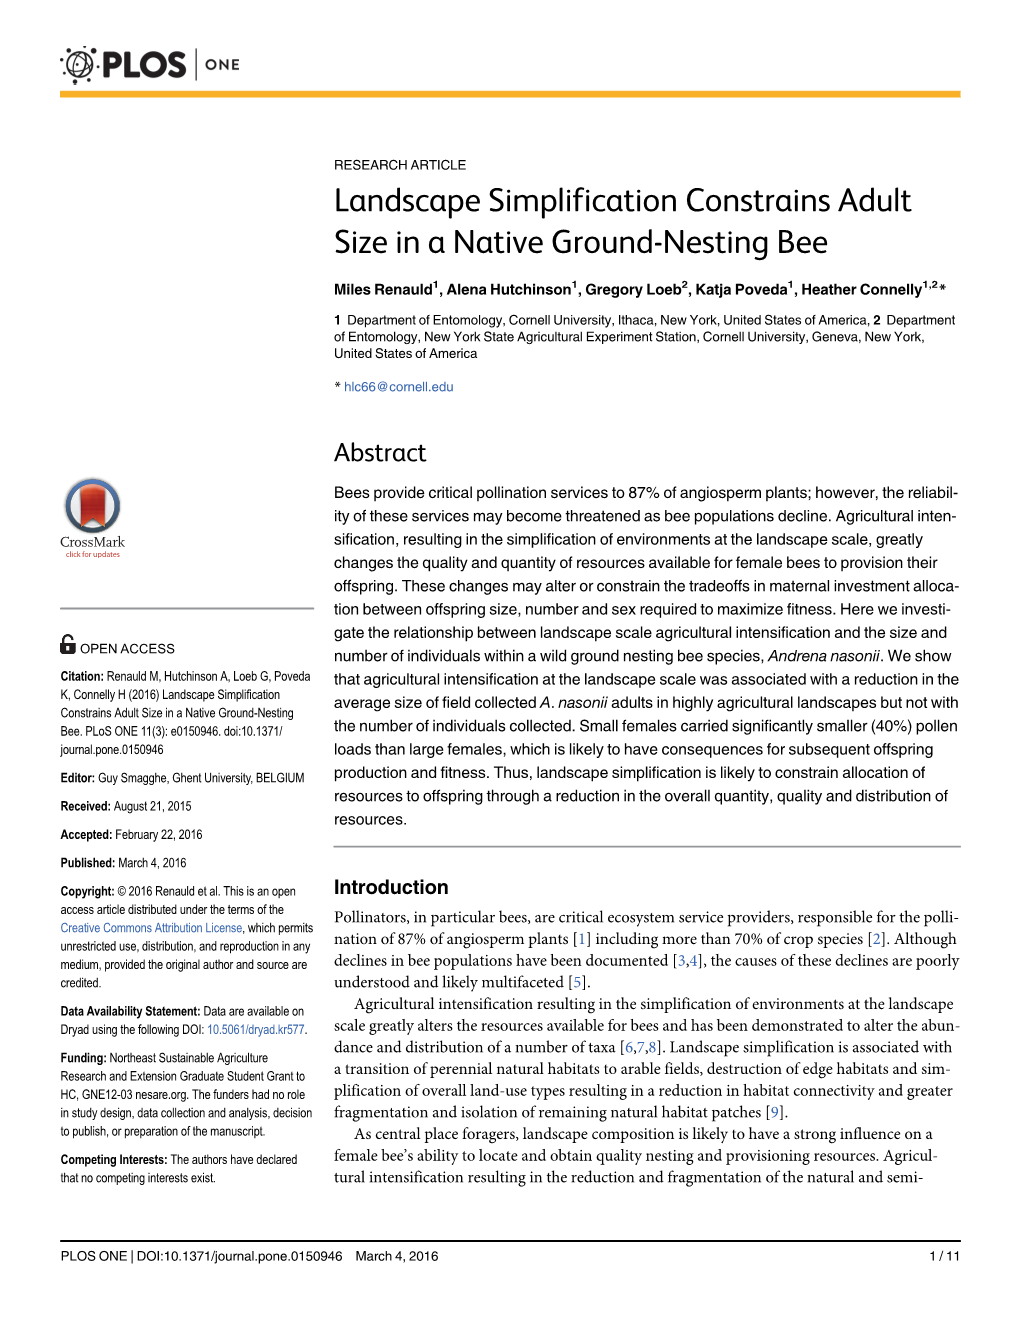 Landscape Simplification Constrains Adult Size in a Native Ground-Nesting Bee